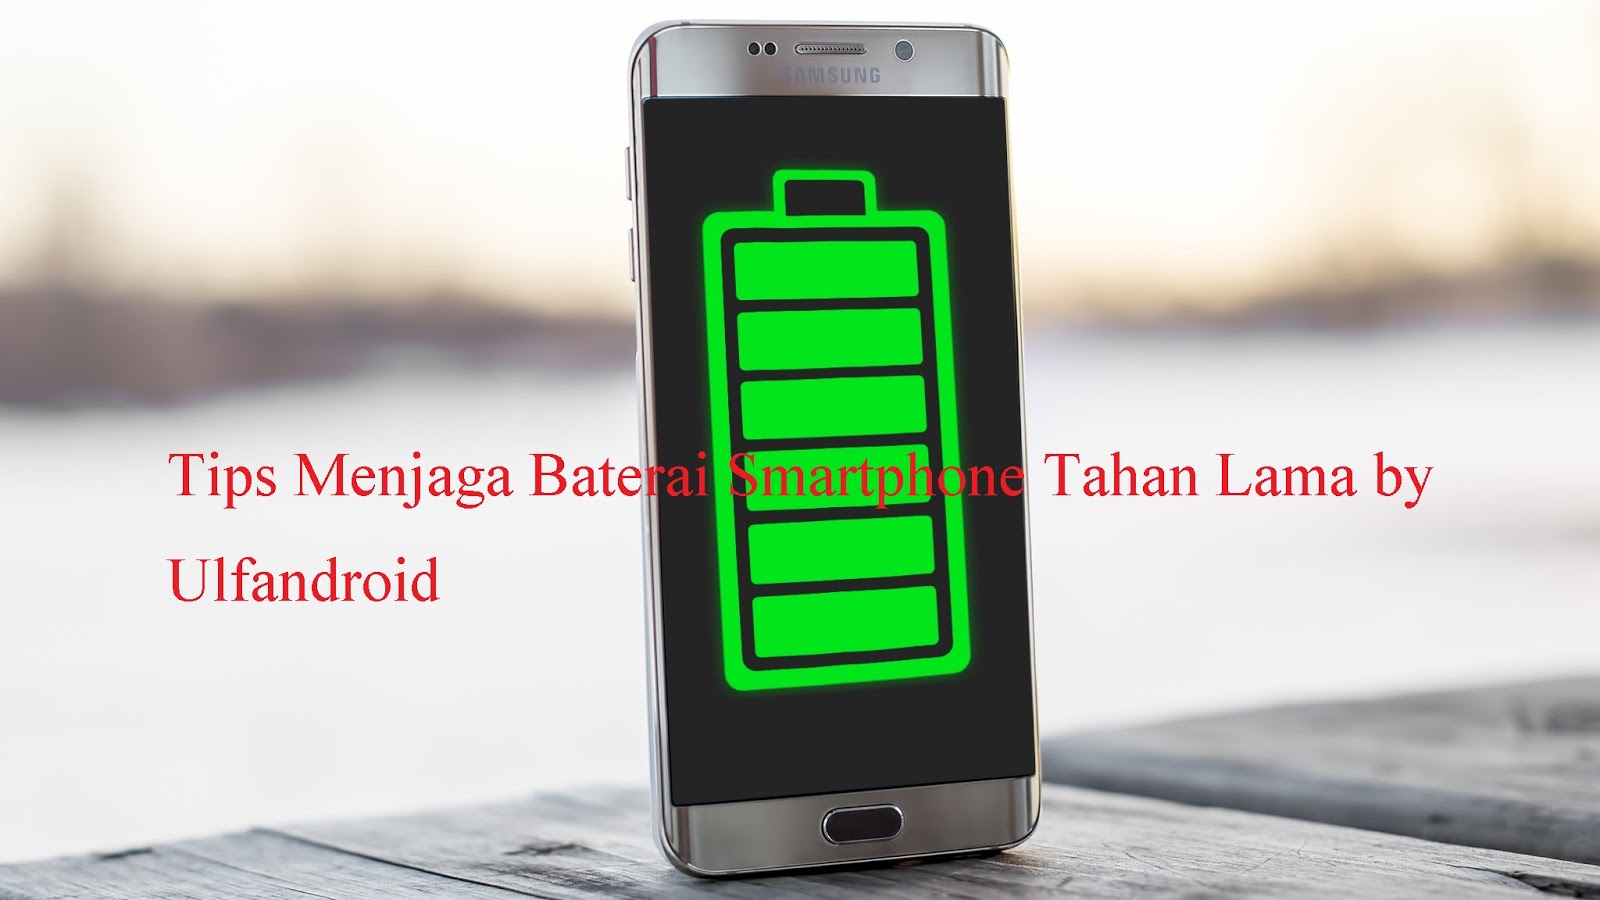 Battery last. Battery lasts longer. Батарея для смартфона Welcome m11_Pro. Built-in Battery in smartphone. All Day Battery Life smartphone.